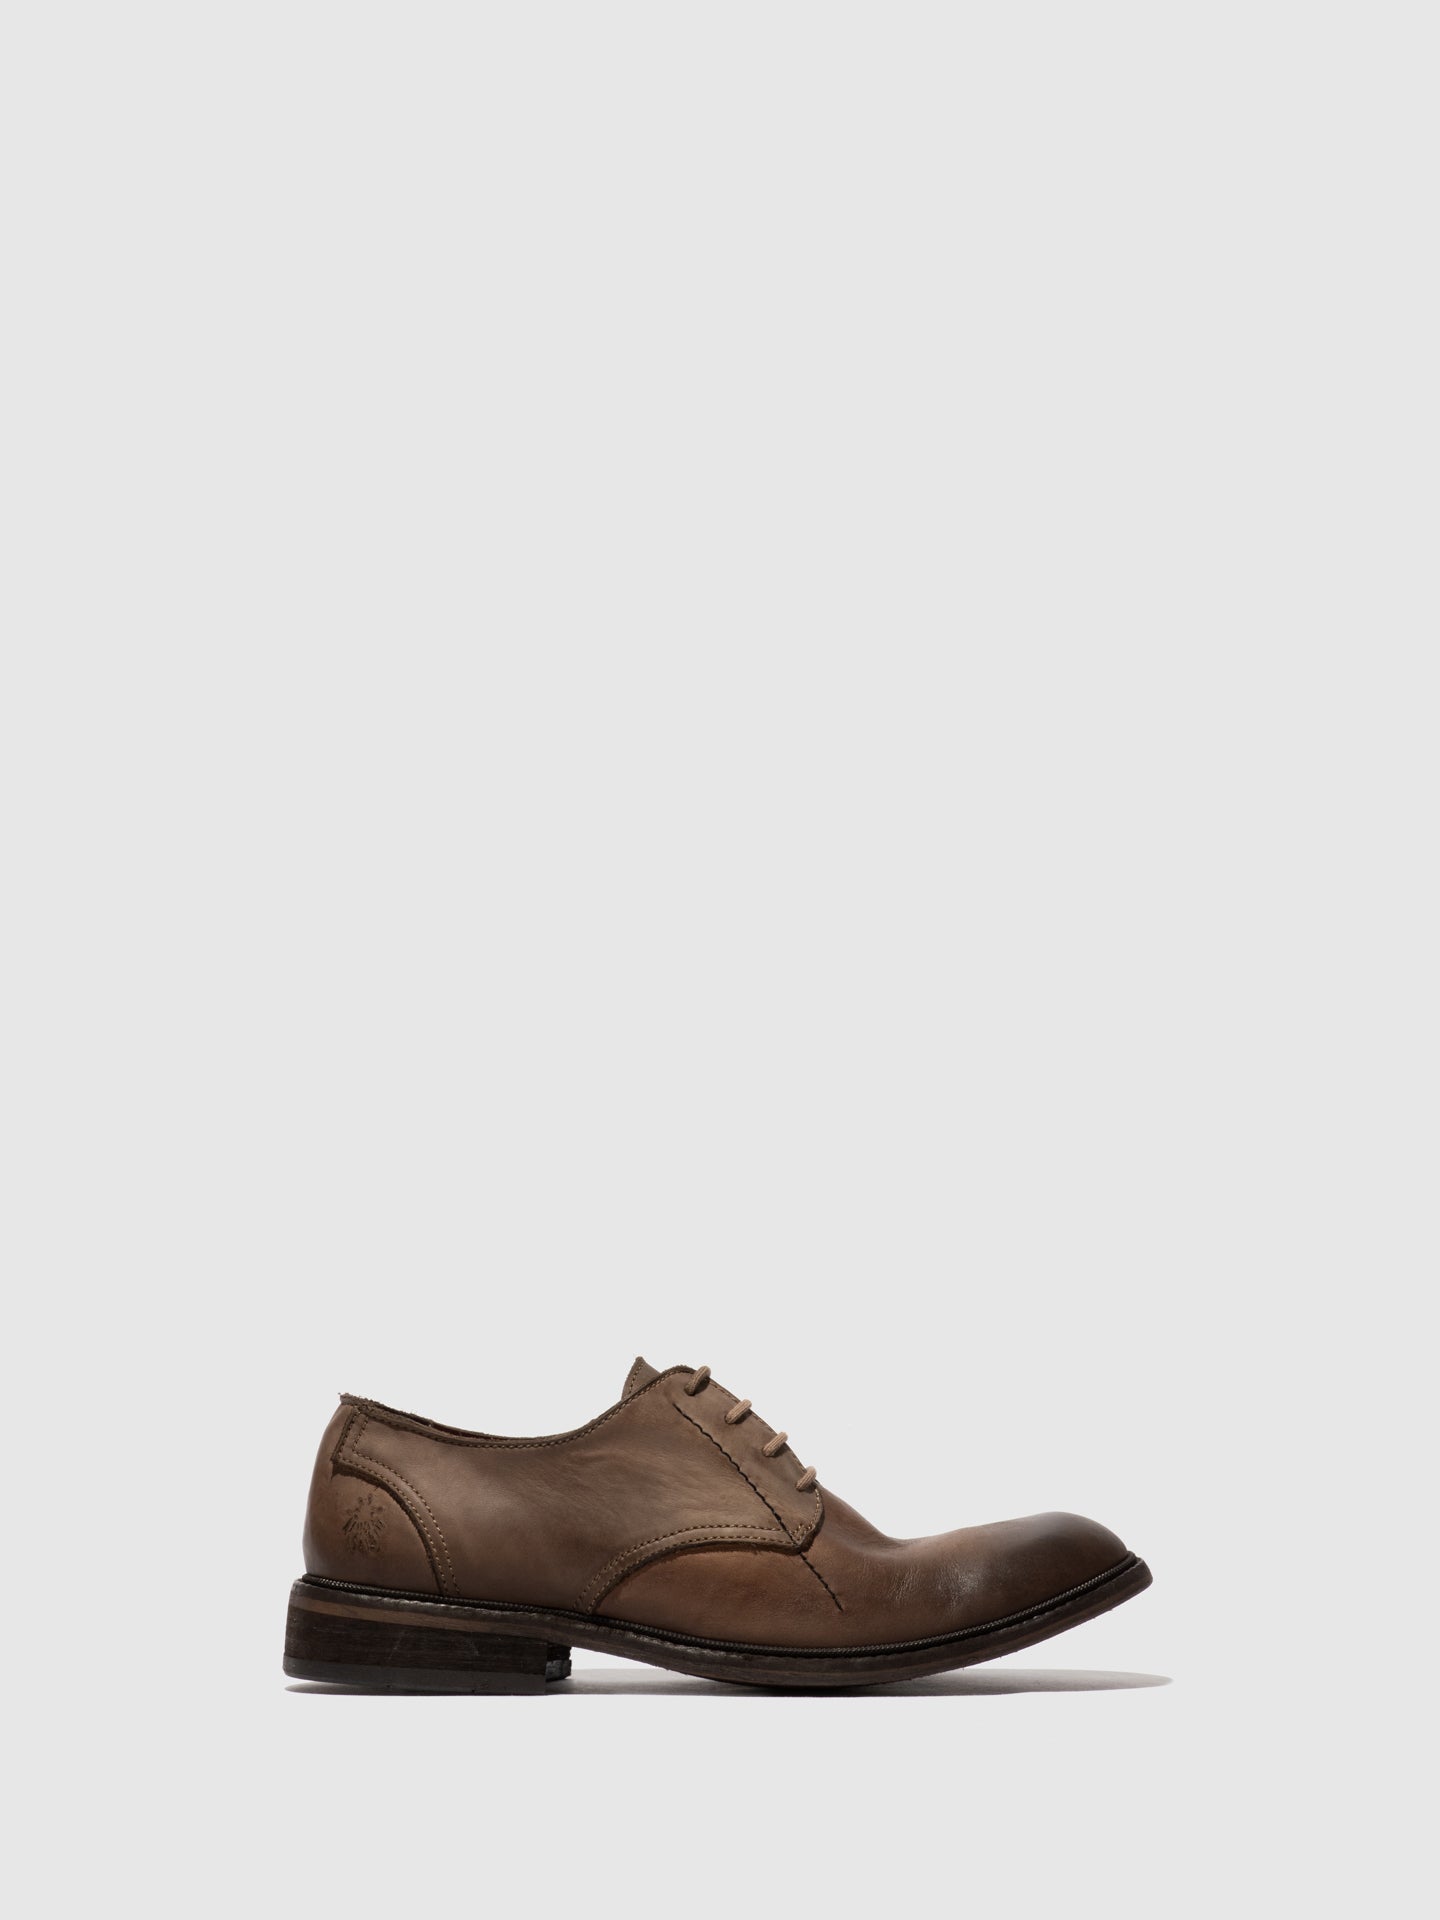 Fly London Derby Shoes HOCO817FLY COFFEE